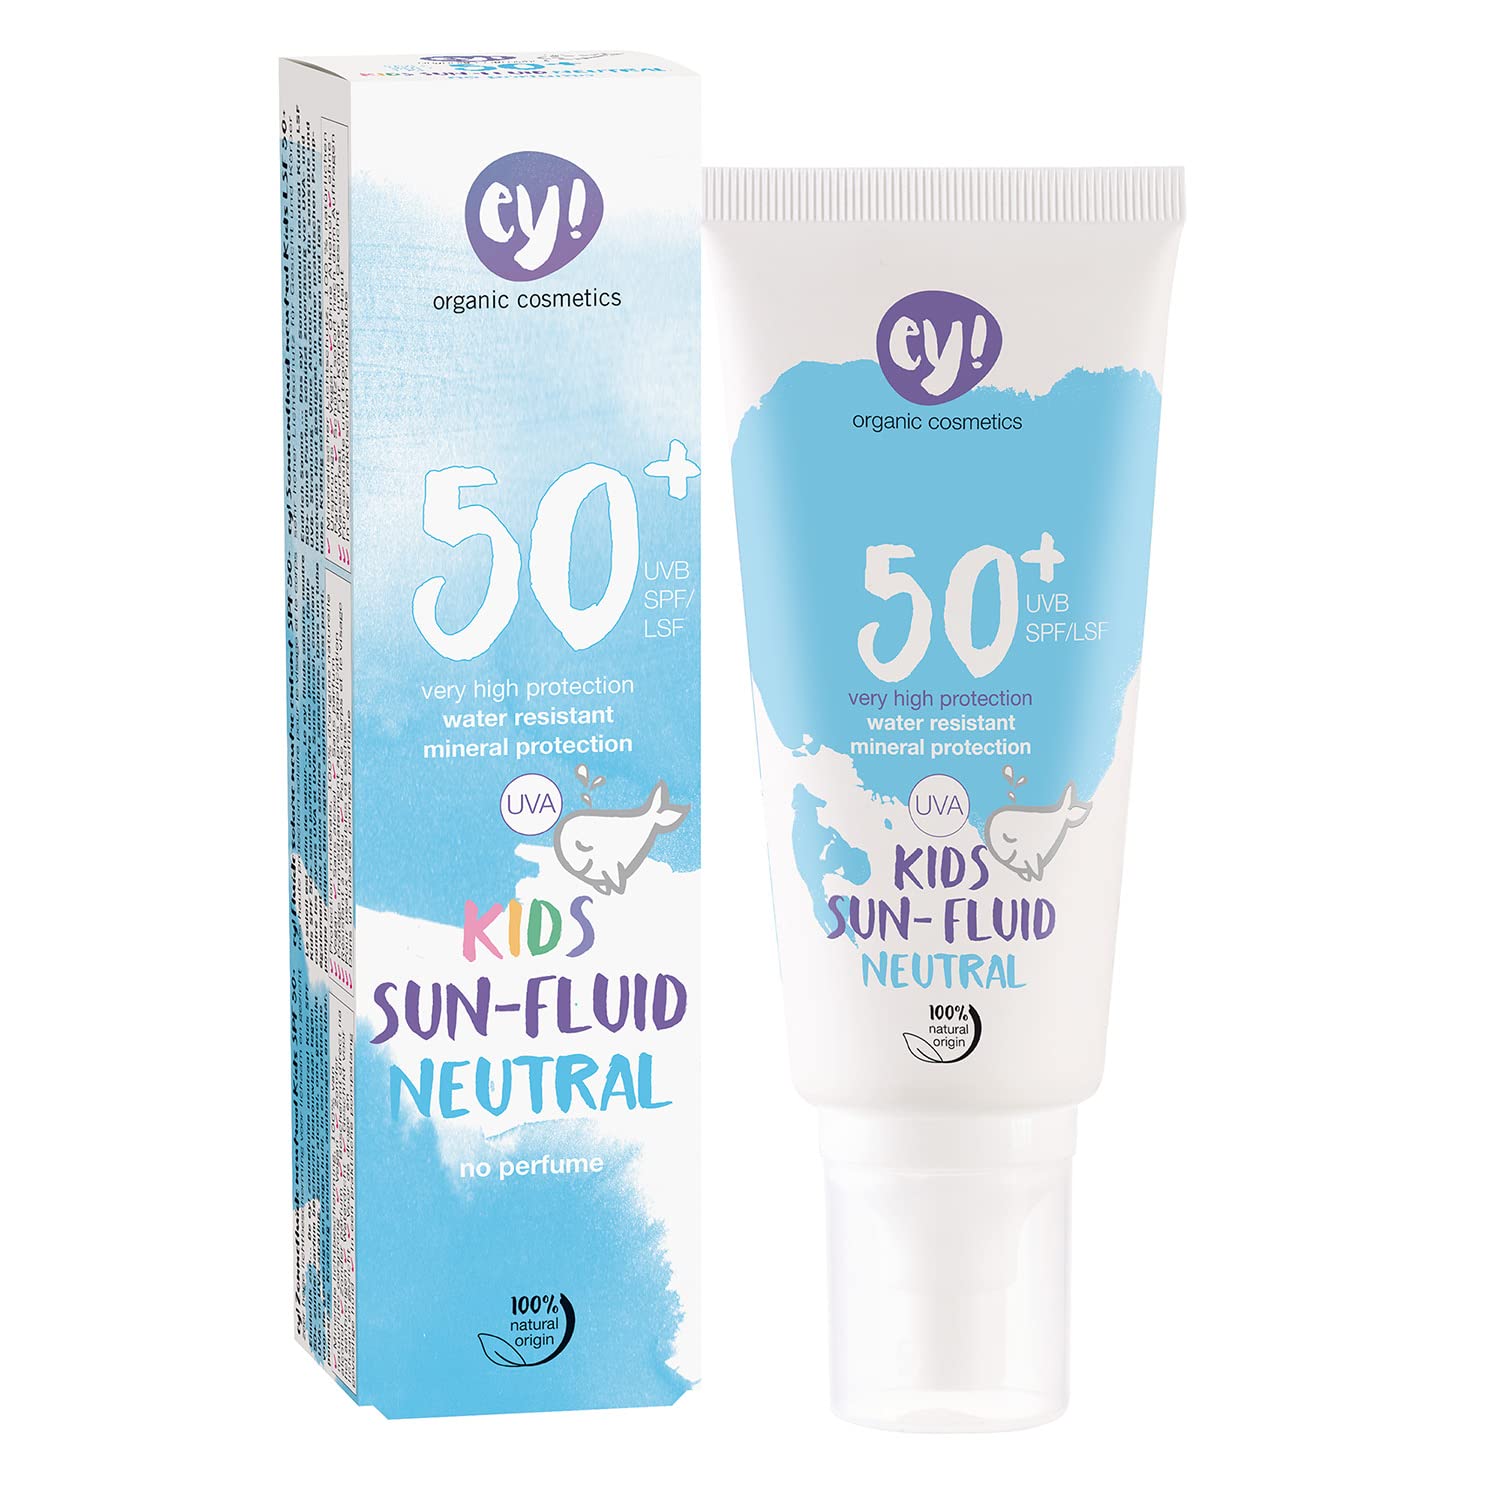 Eco Cosmetics ey! organic cosmetics Kids Sun Spray SPF 50+ Neutral, Waterproof, Fragrance-Free, Vegan, Natural Cosmetics for Face and Body 100 ml